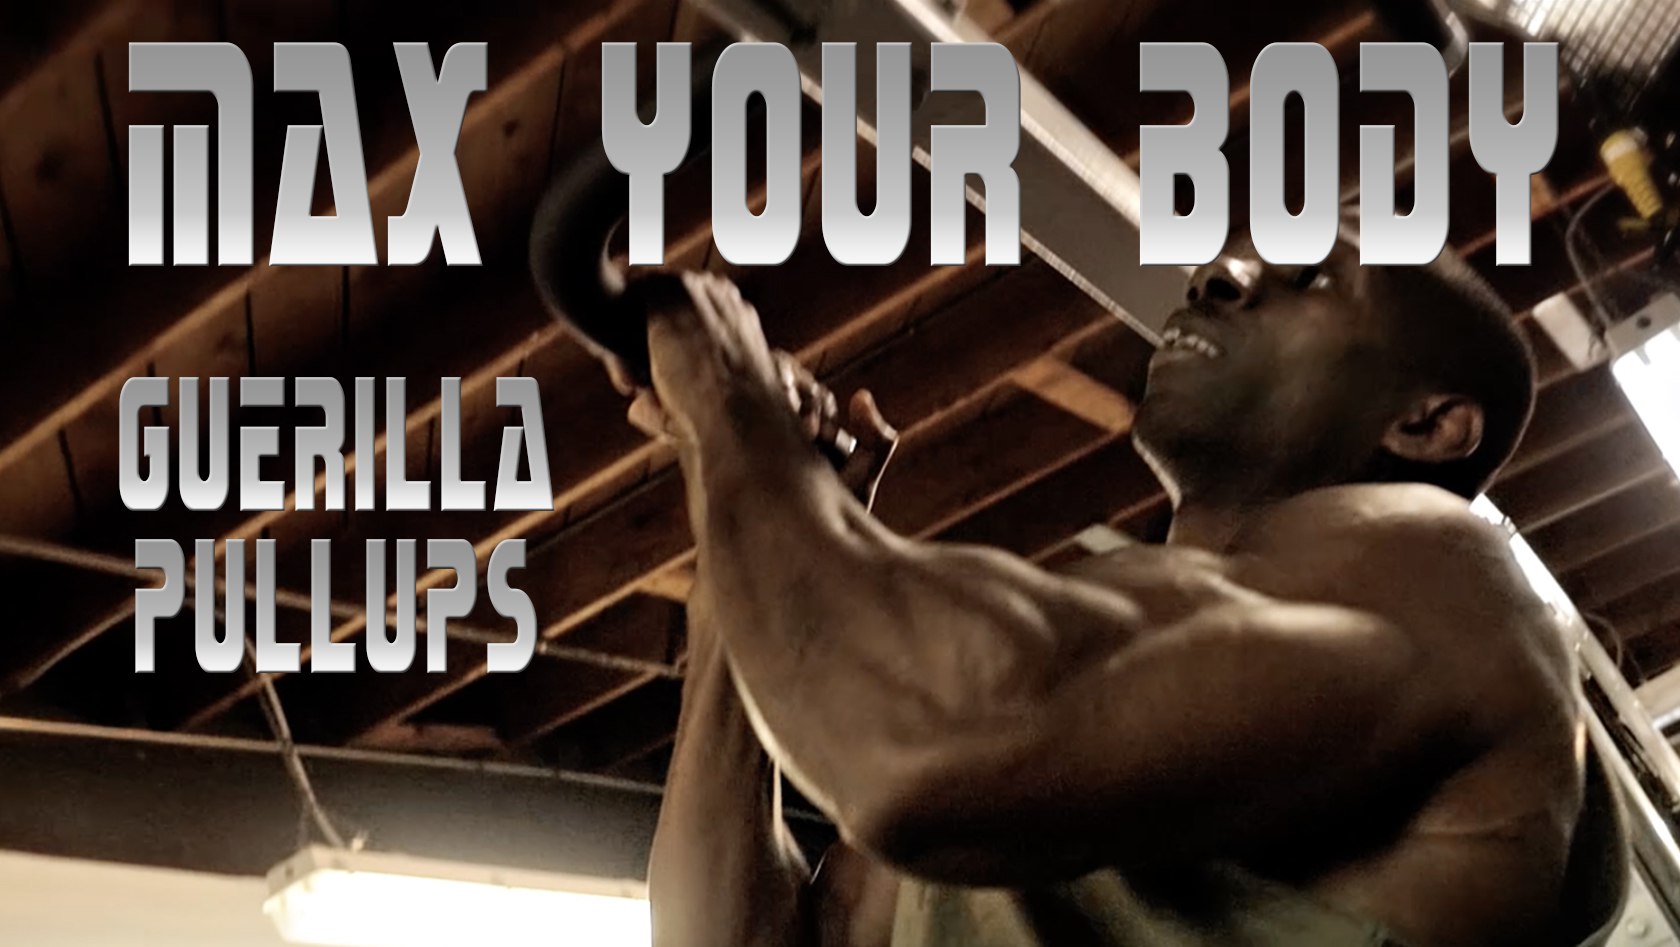 Max “The Body” shows how to perform the v-crunch